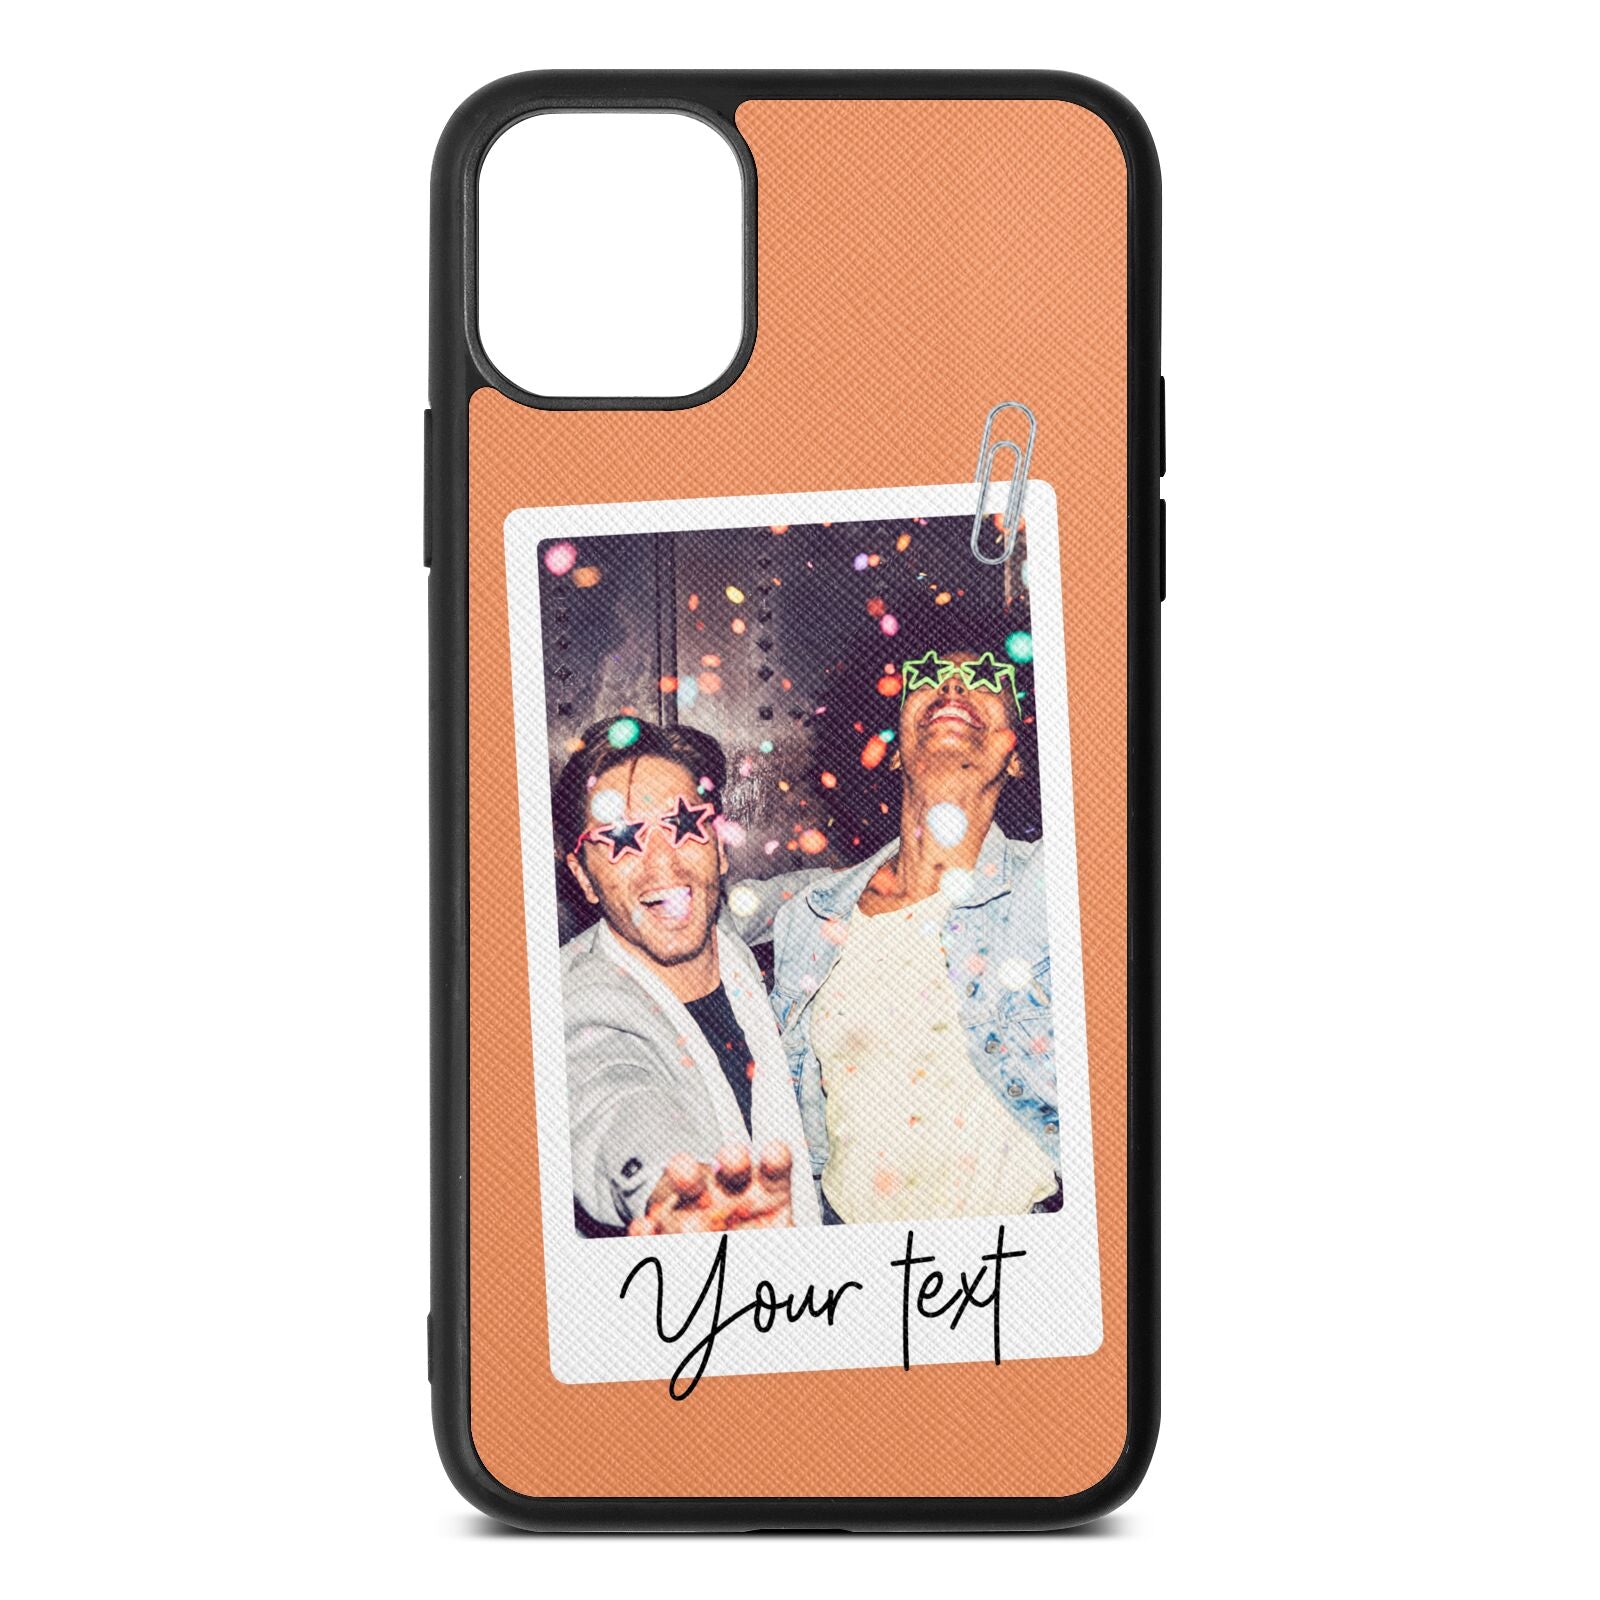 Personalised Photo with Text Orange Saffiano Leather iPhone 11 Pro Max Case